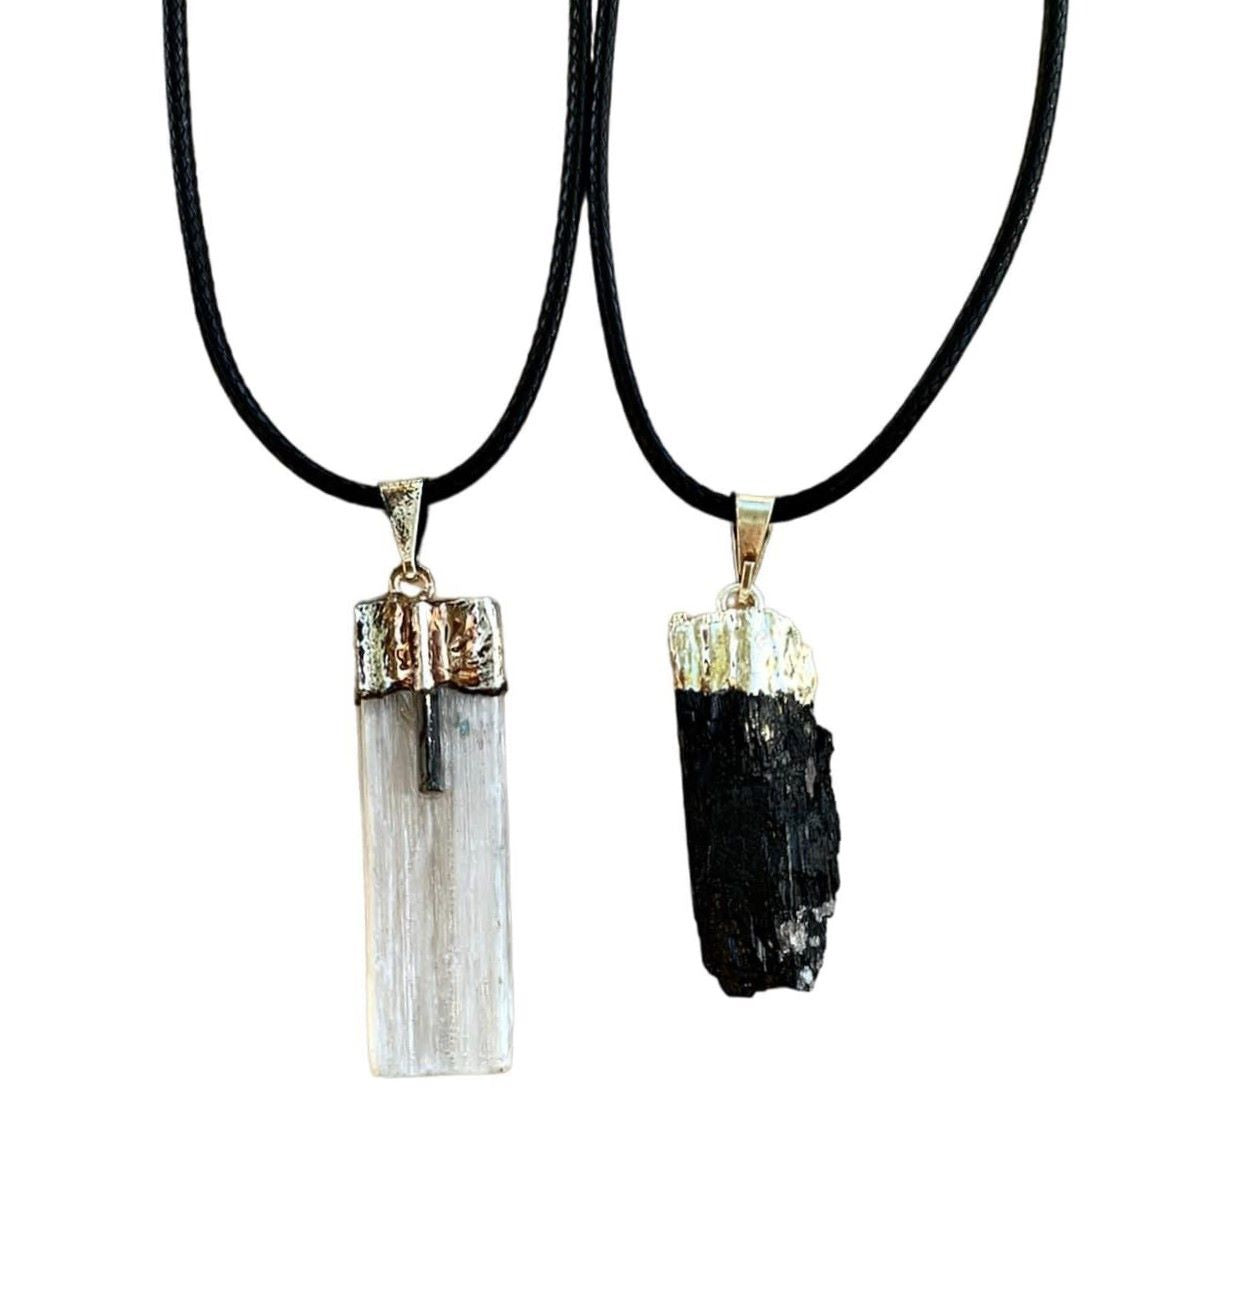 Crystal Necklaces for Protection Selenite Black Tourmaline